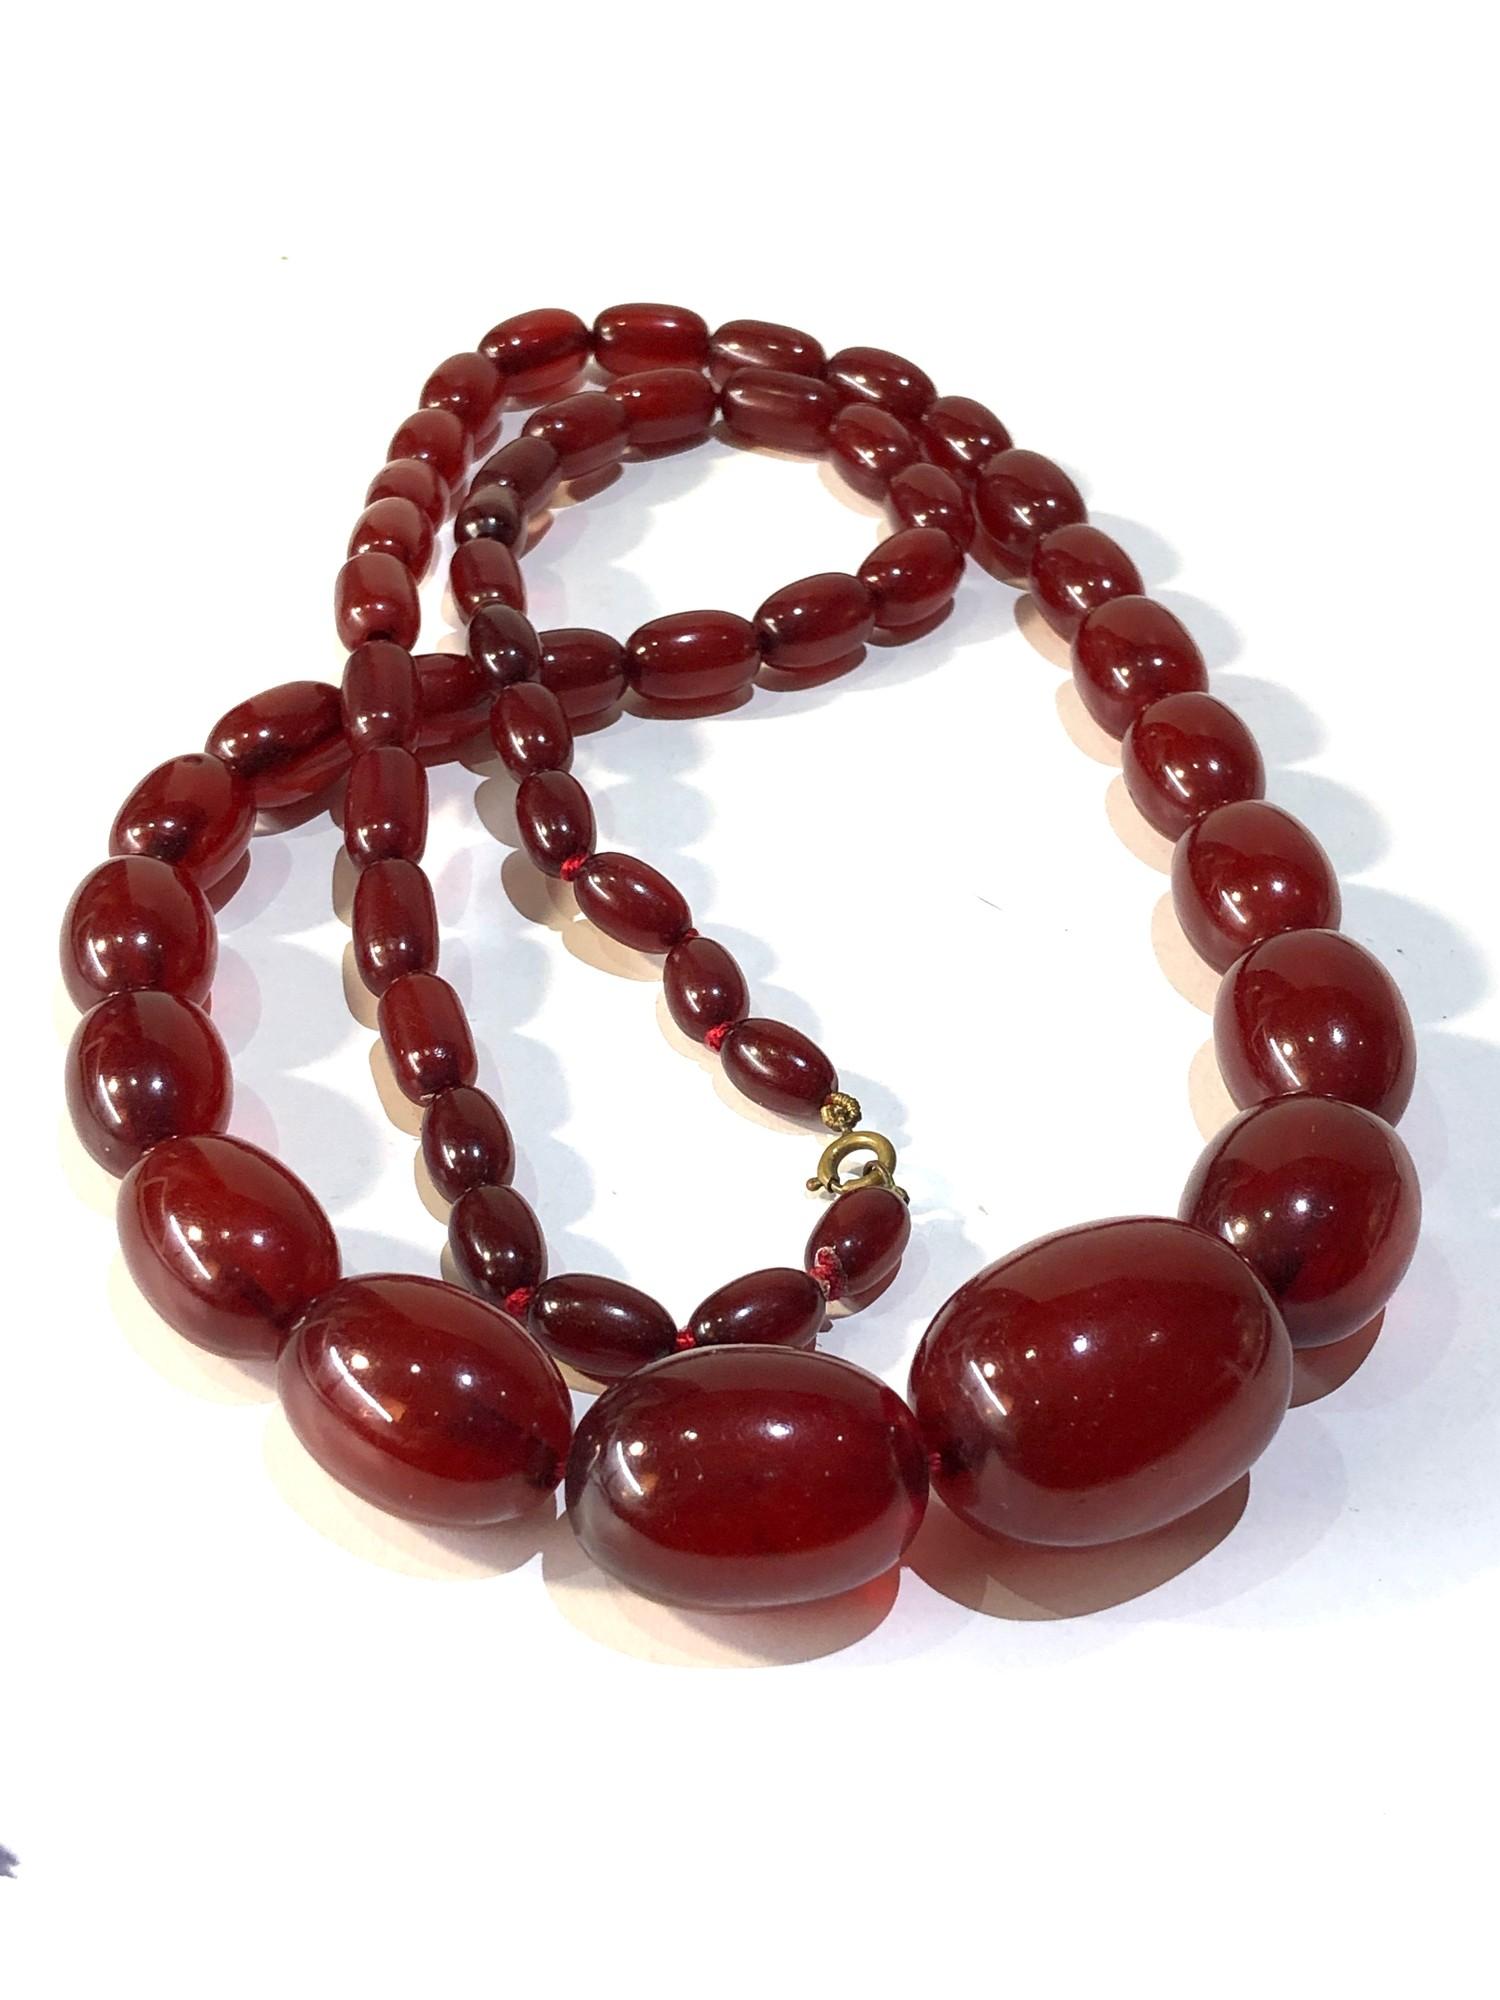 Antique cherry amber / bakelite bead necklace largest bead measures approx 3.1cm by 2.3cm weight 90g - Image 2 of 4